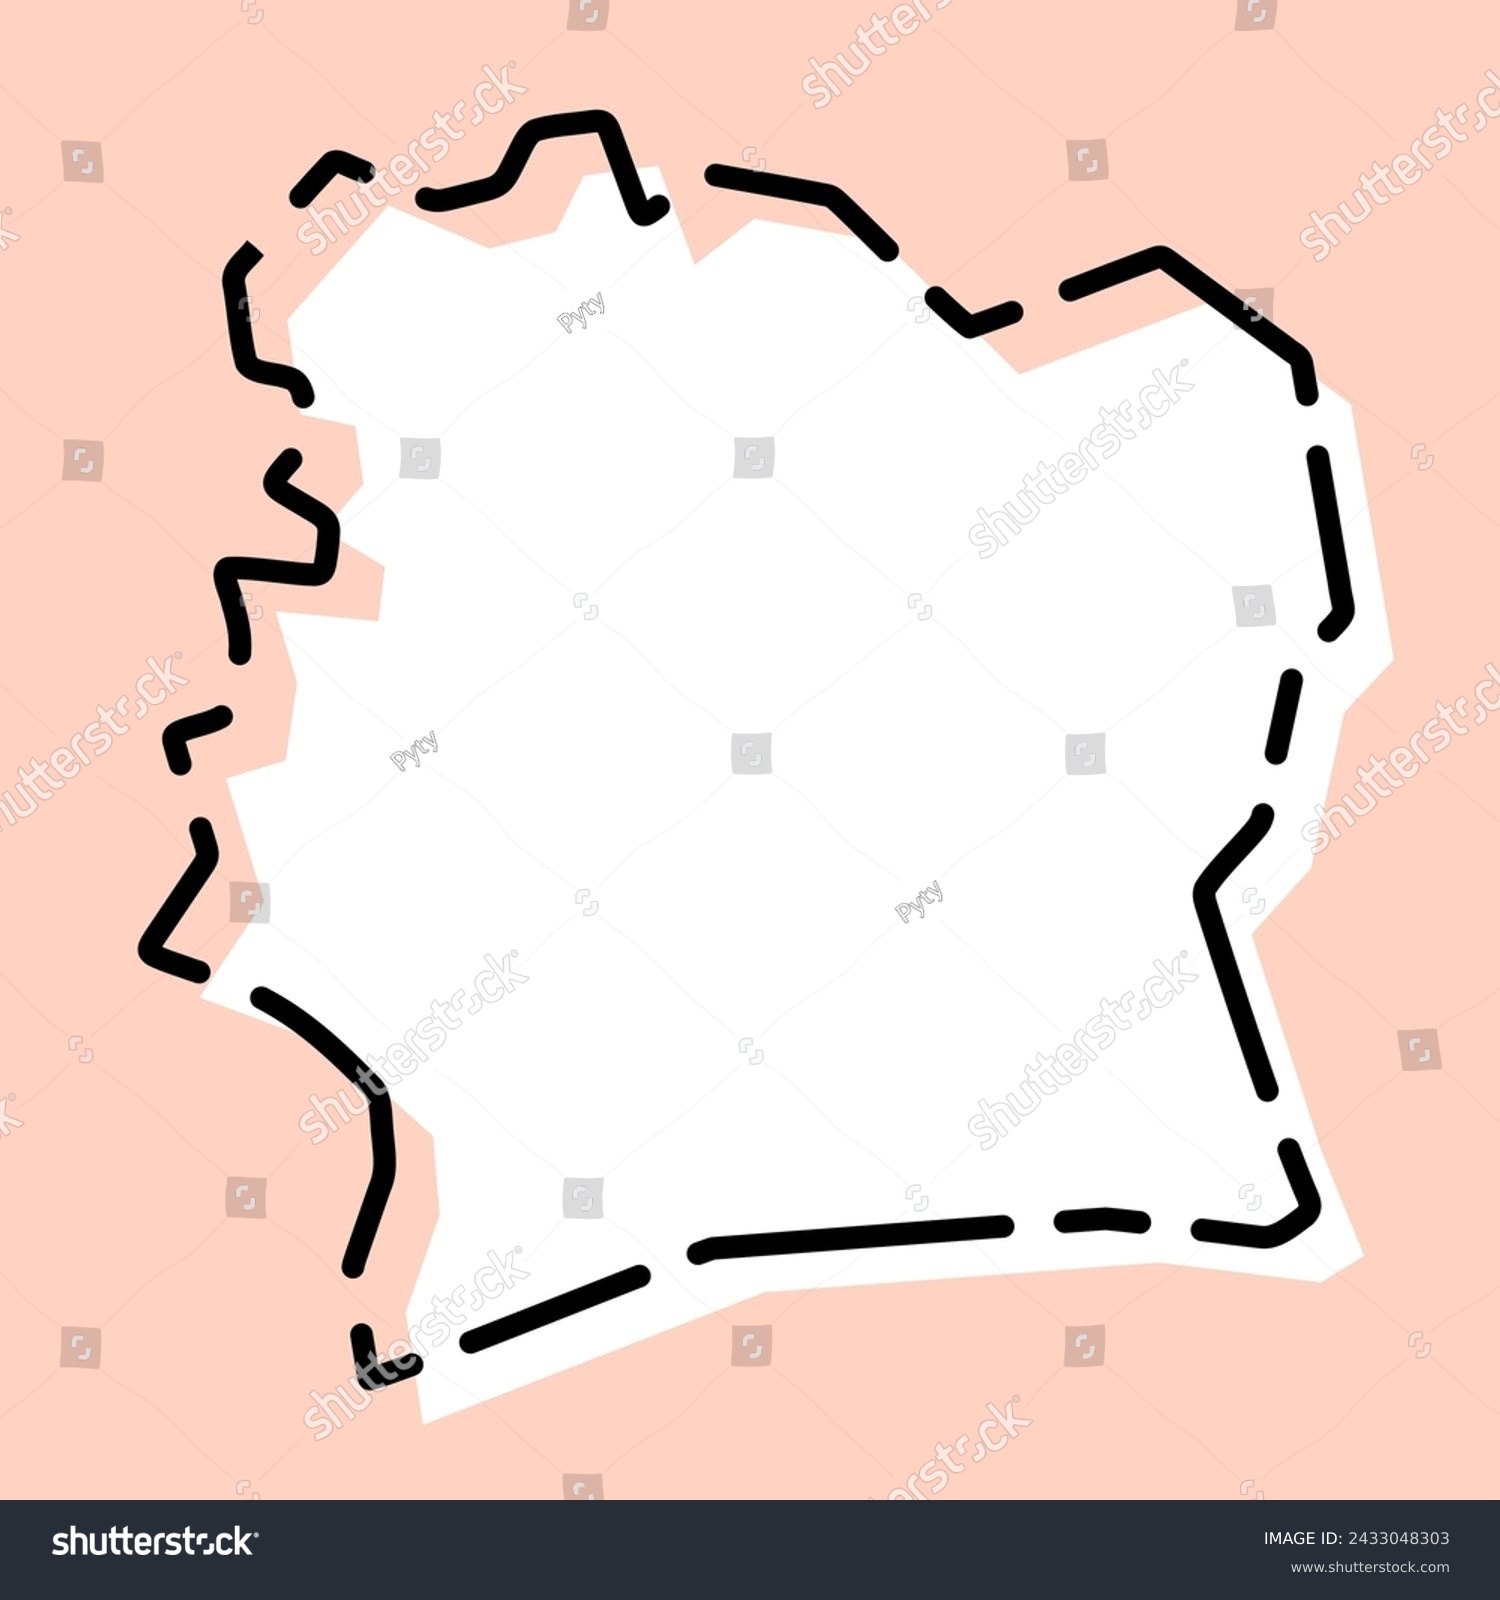 SVG of Ivory Coast country simplified map. White silhouette with black broken contour on pink background. Simple vector icon svg